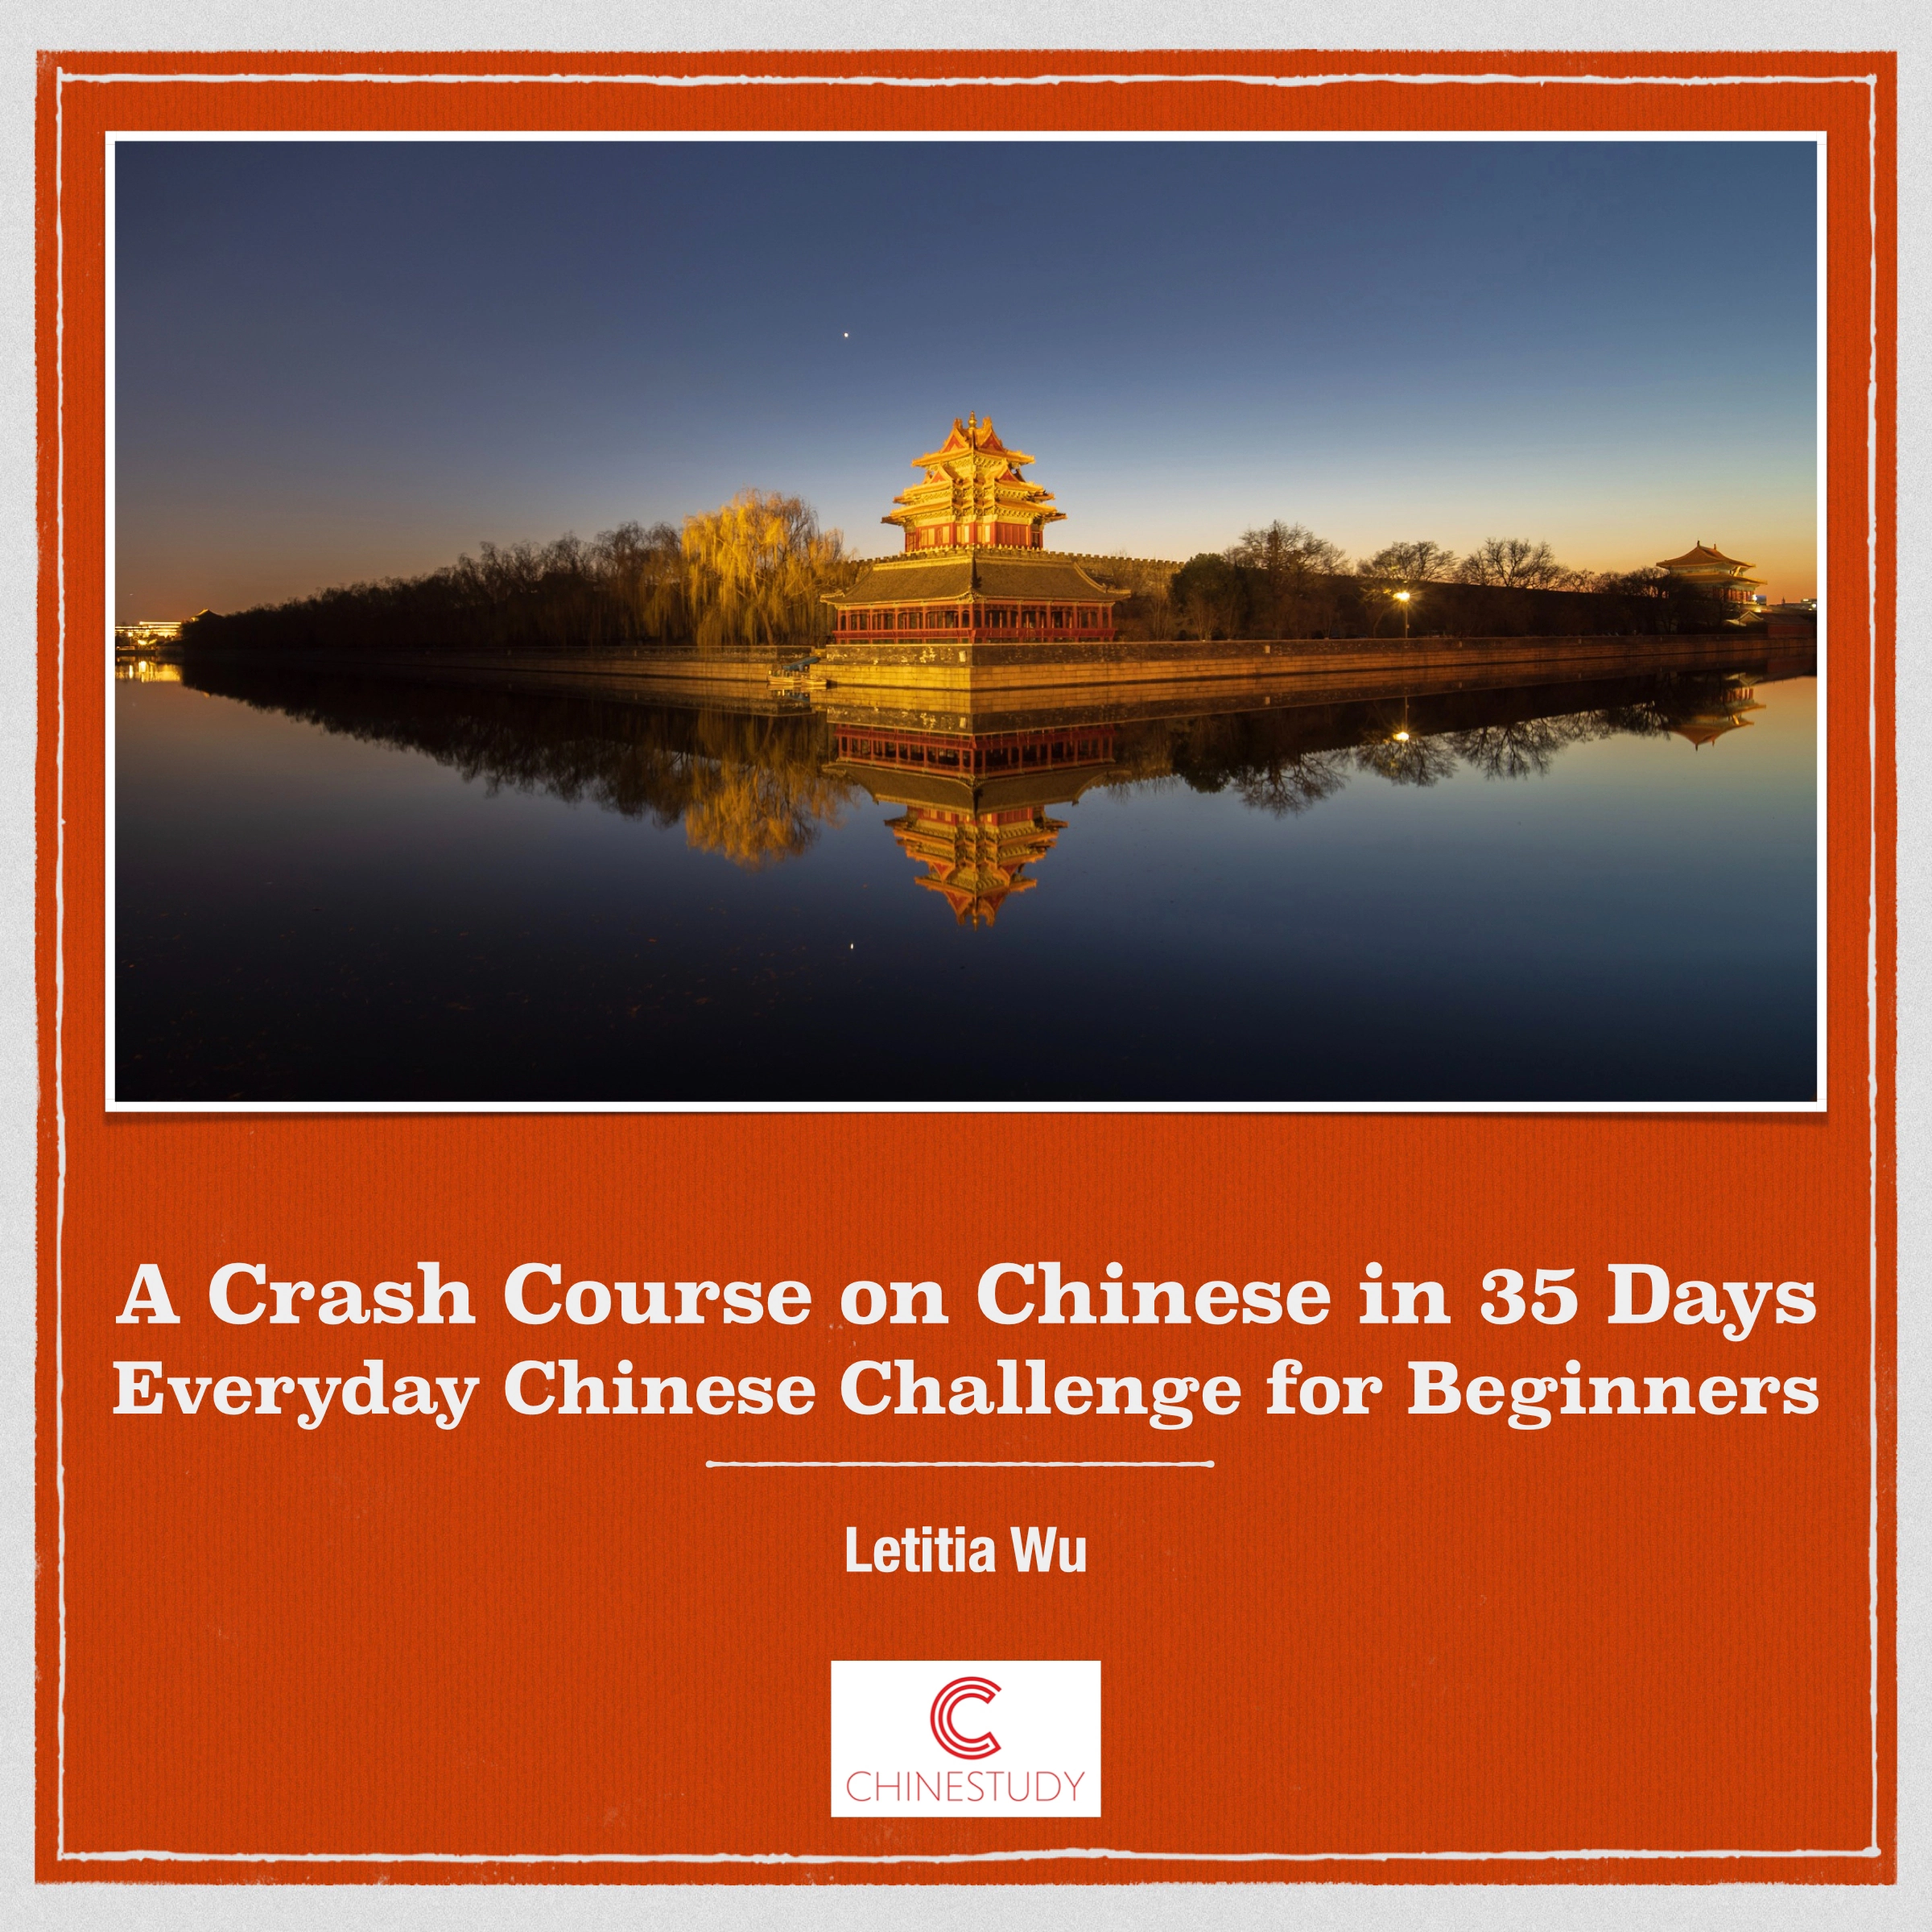 A Crash Course on Chinese in 35 Days Audiobook by Letitia Wu